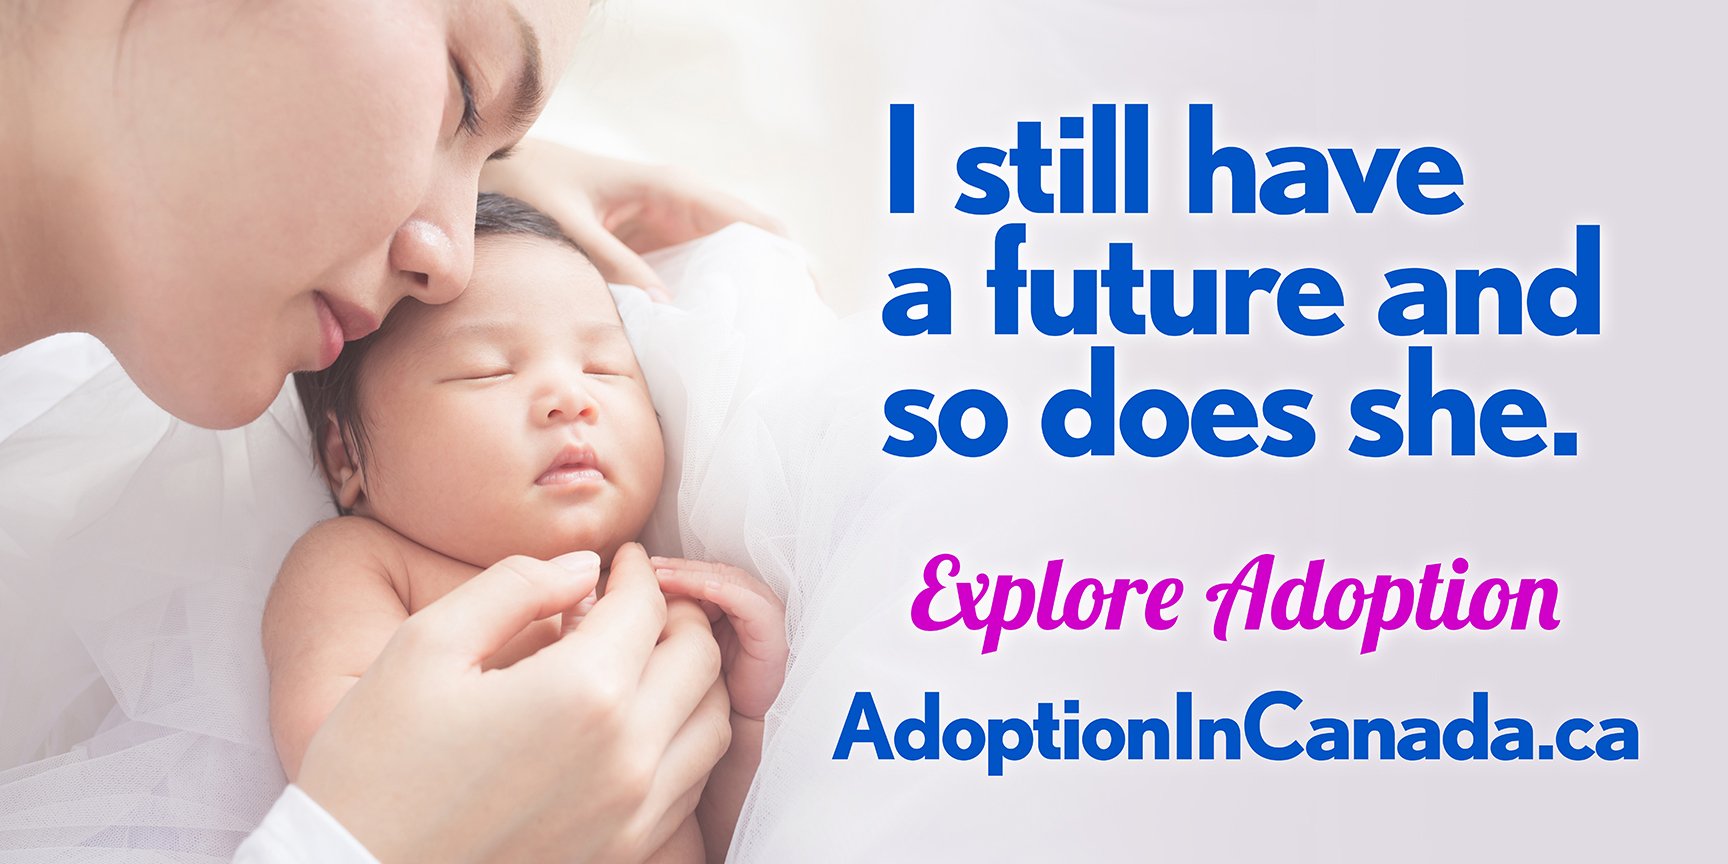 I Still have a future and so does she. Explore adoption.jpg